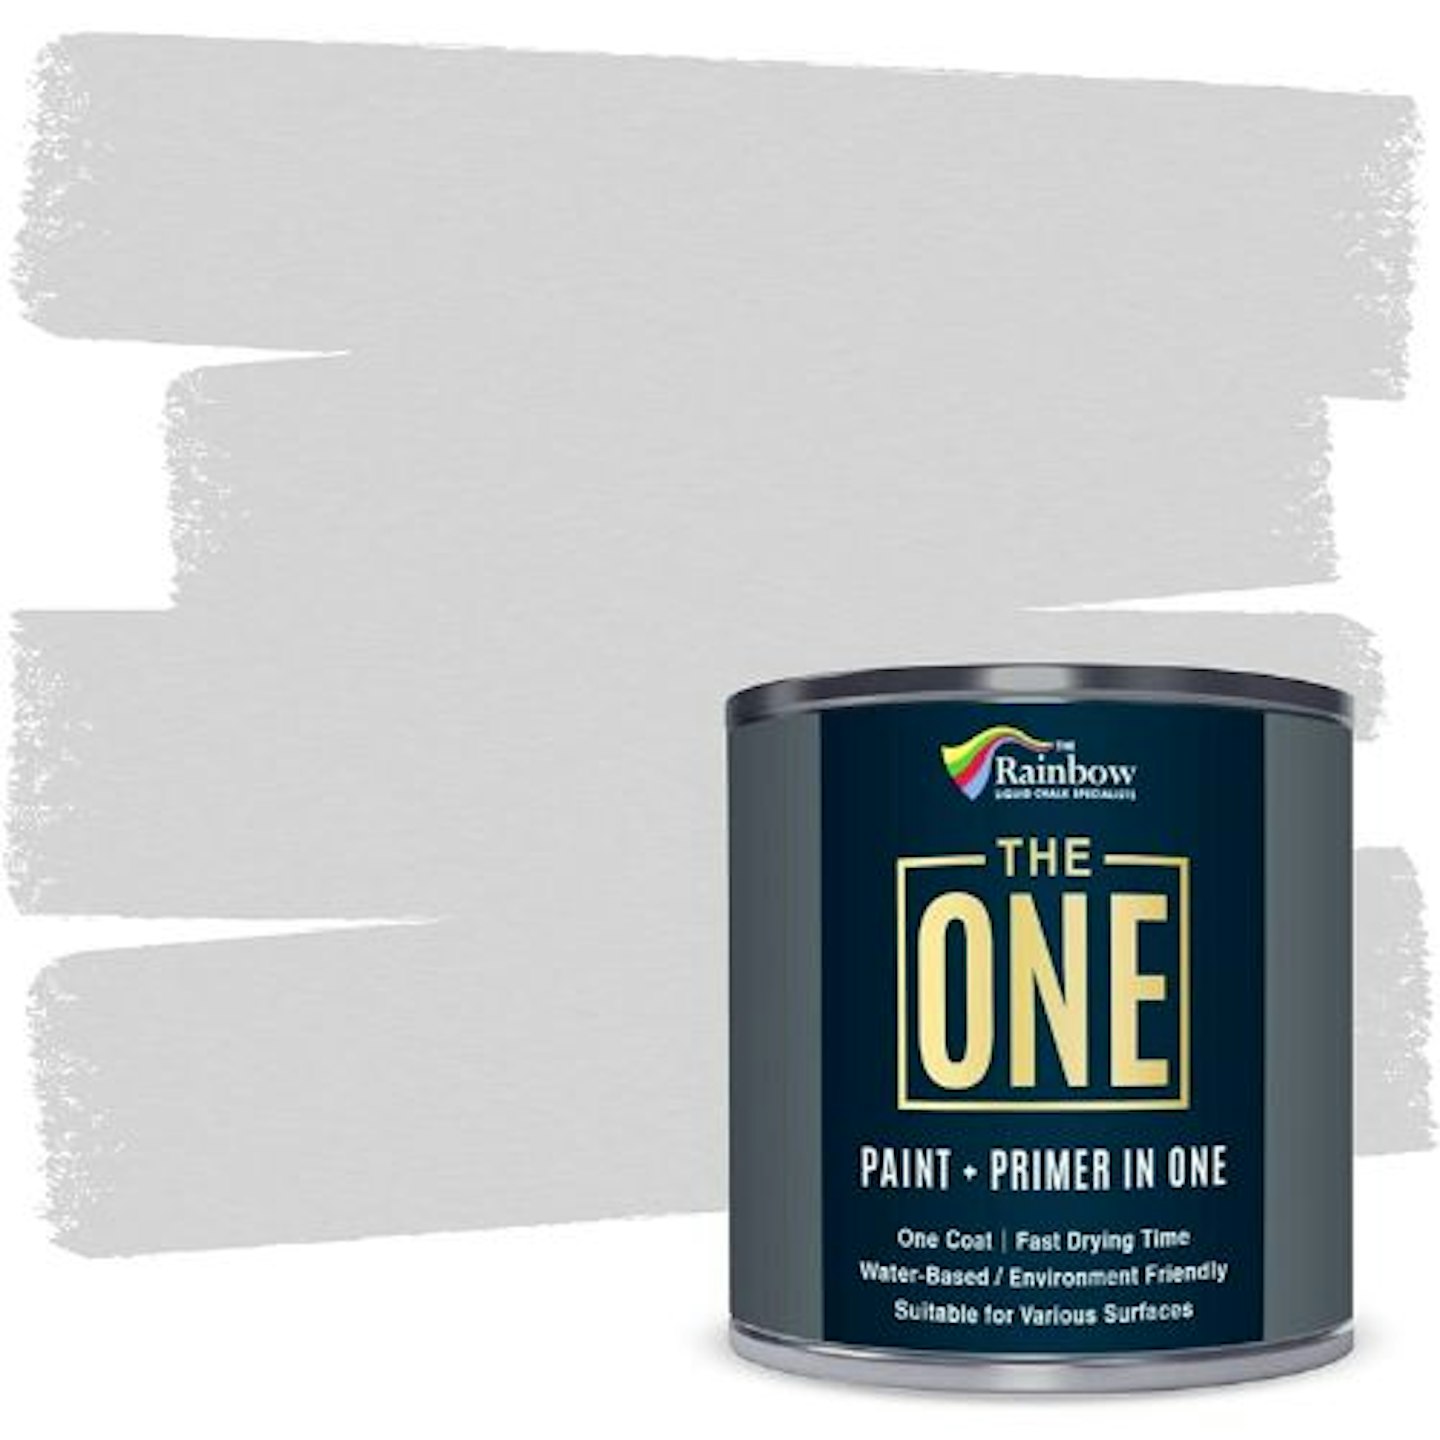 THE ONE Paint & Primer